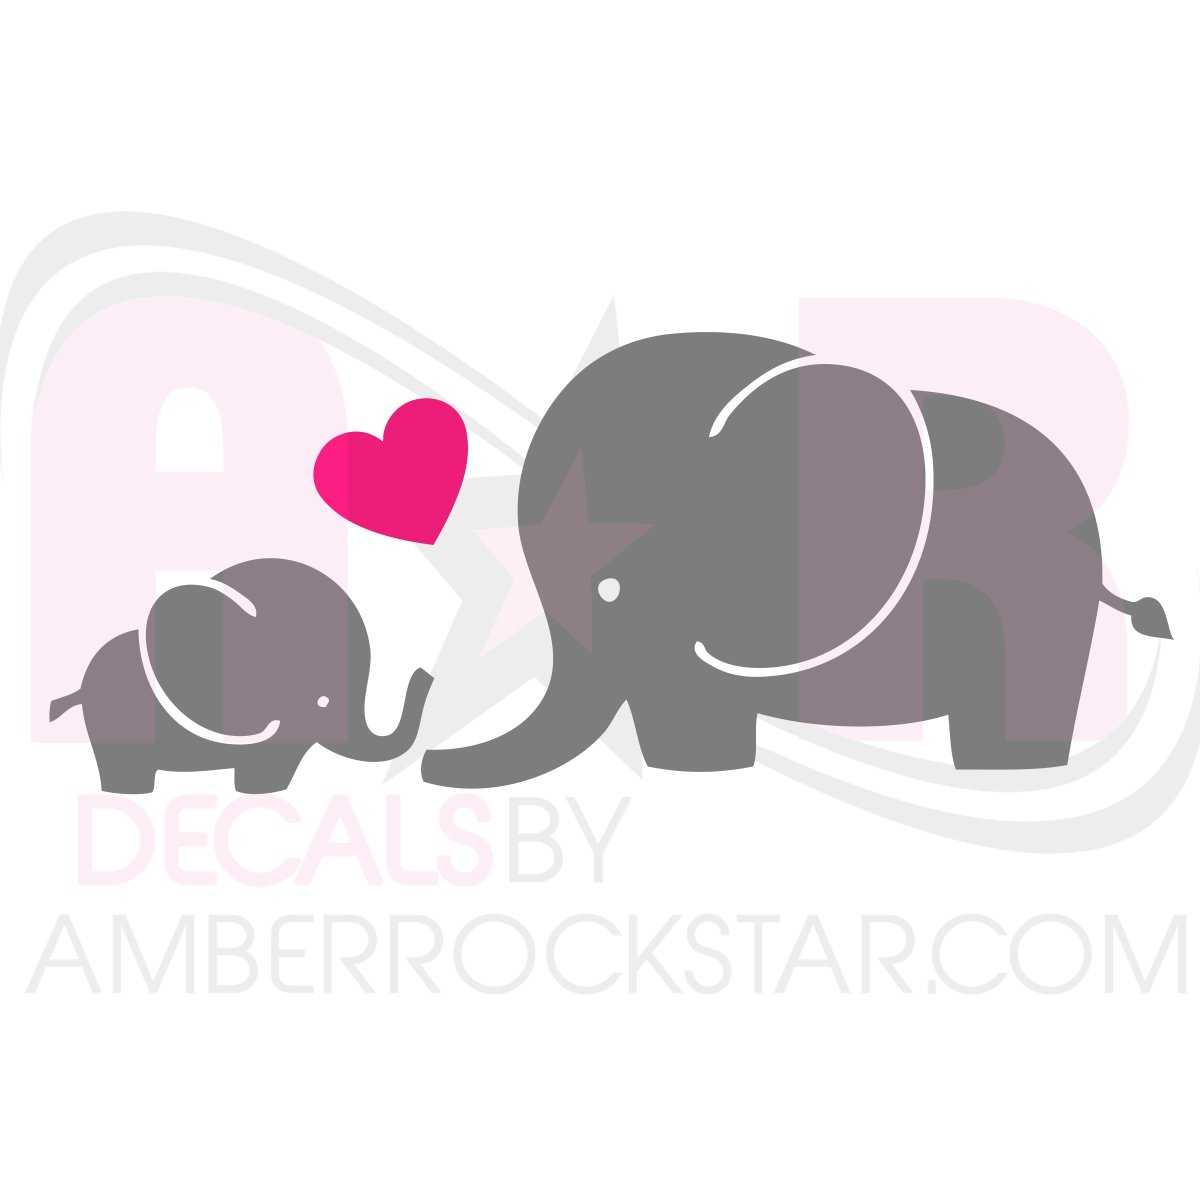 Baby and Momma Elephant Decal | Amber Rockstar 